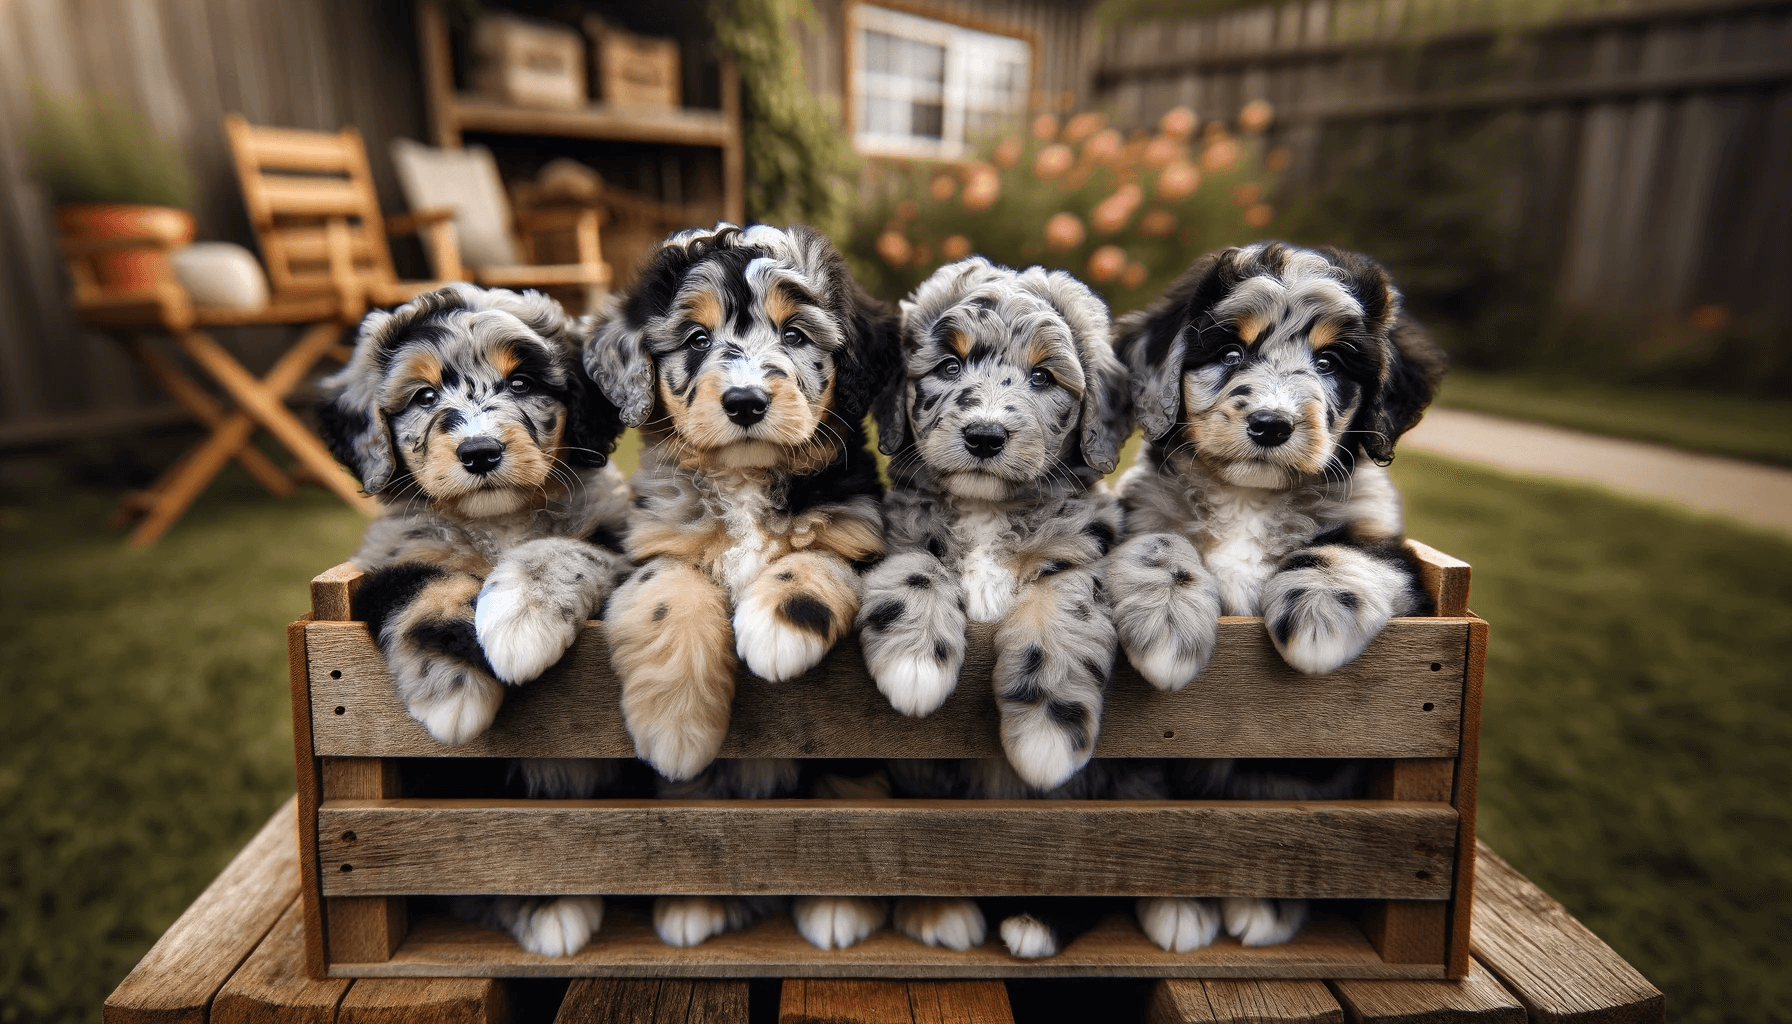 Merle Aussiedoodle puppies in a wooden crate, each showcasing the unique merle patterns that characterize the breed with expressions full of curiosity and playfulness.